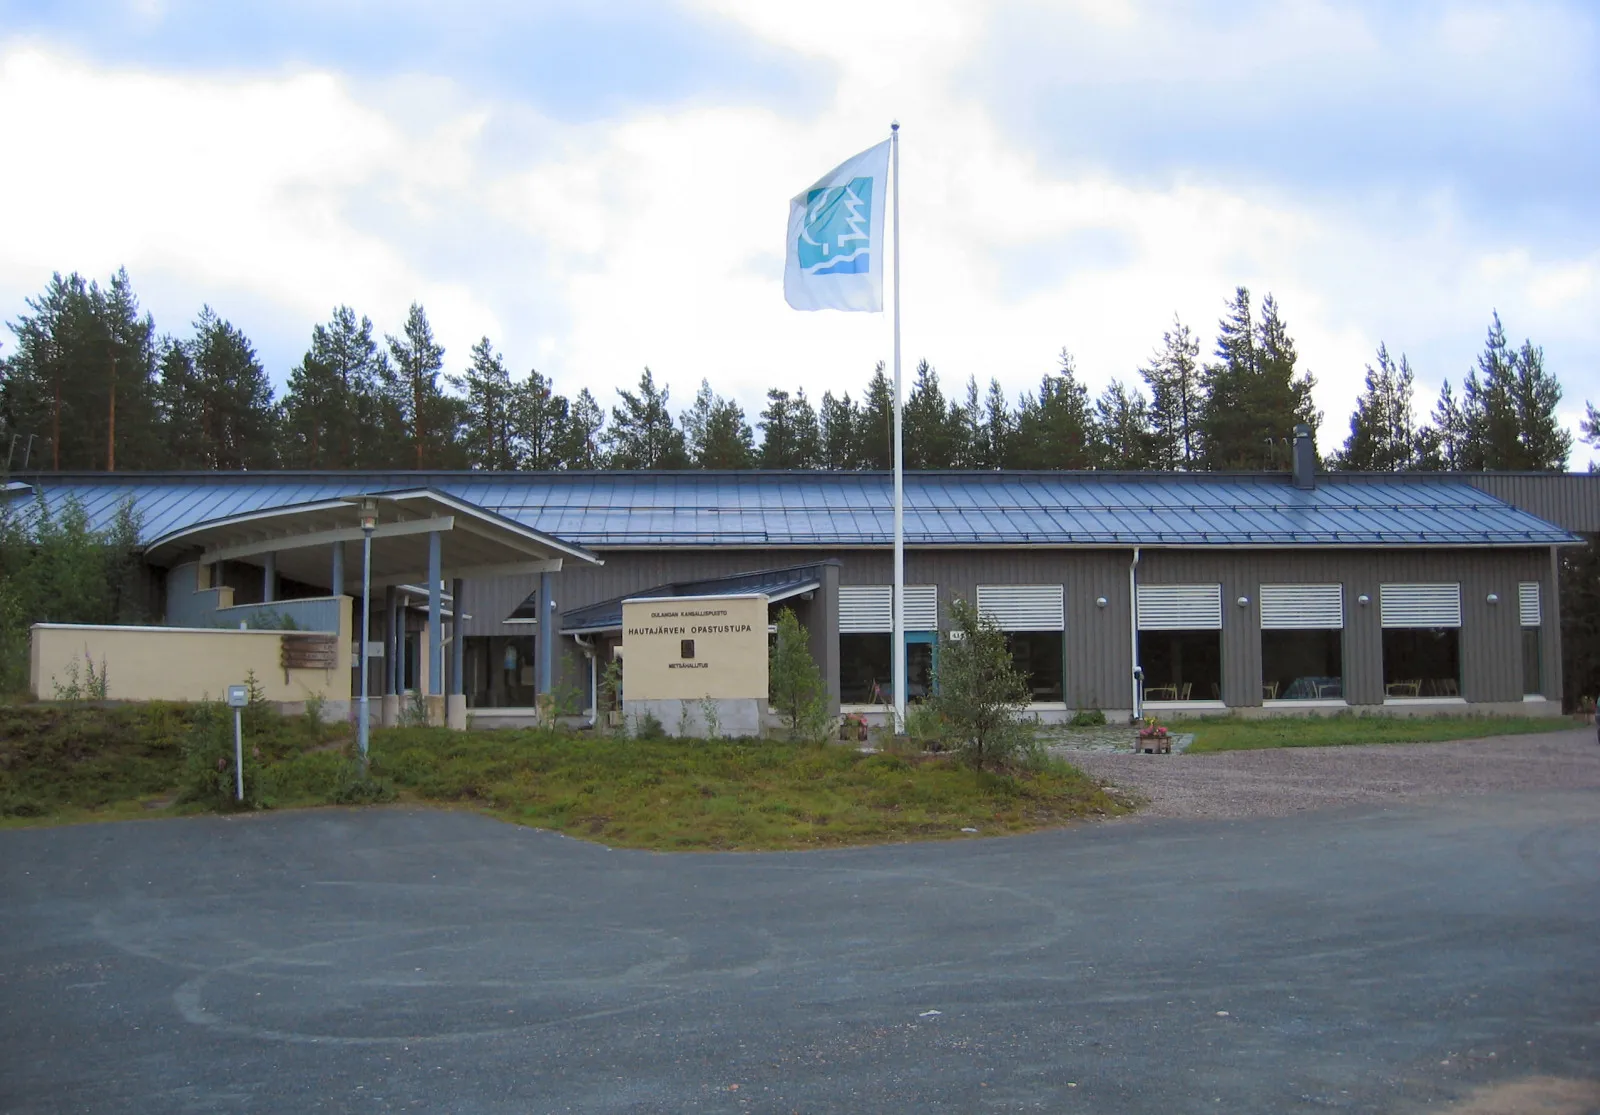 Photo showing: Picture of "Hautajärven luontotalo" (or "Hautajärven opastustupa", "Hautajärvi information center"), at Lapland of Finland, at the Oulanka National Park.